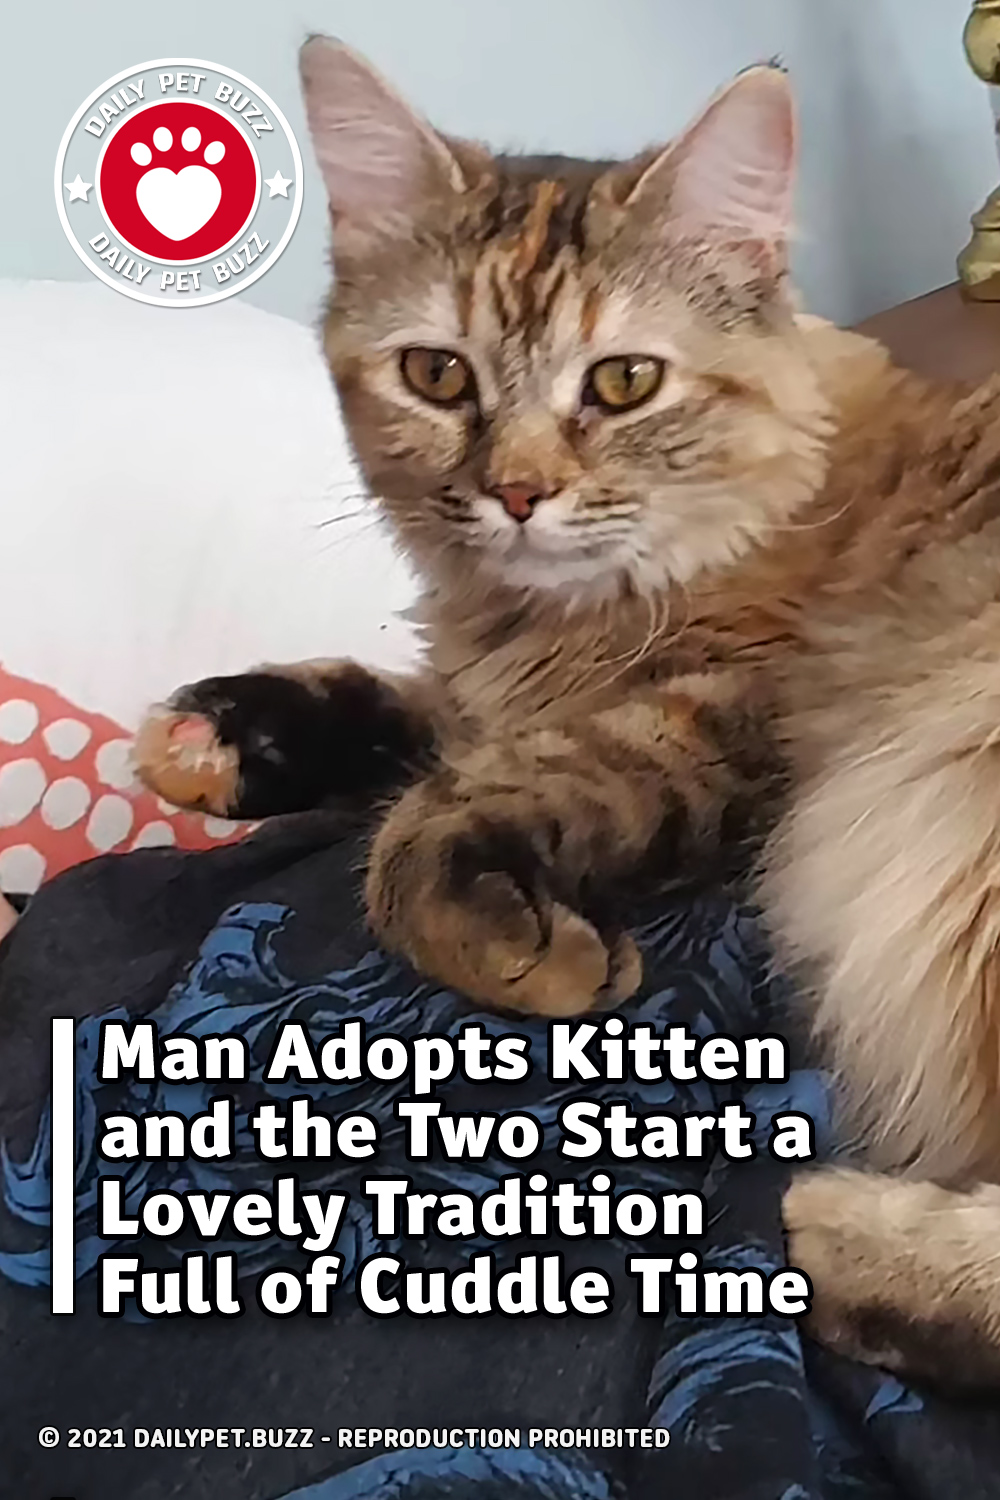 Man Adopts Kitten and the Two Start a Lovely Tradition Full of Cuddle Time